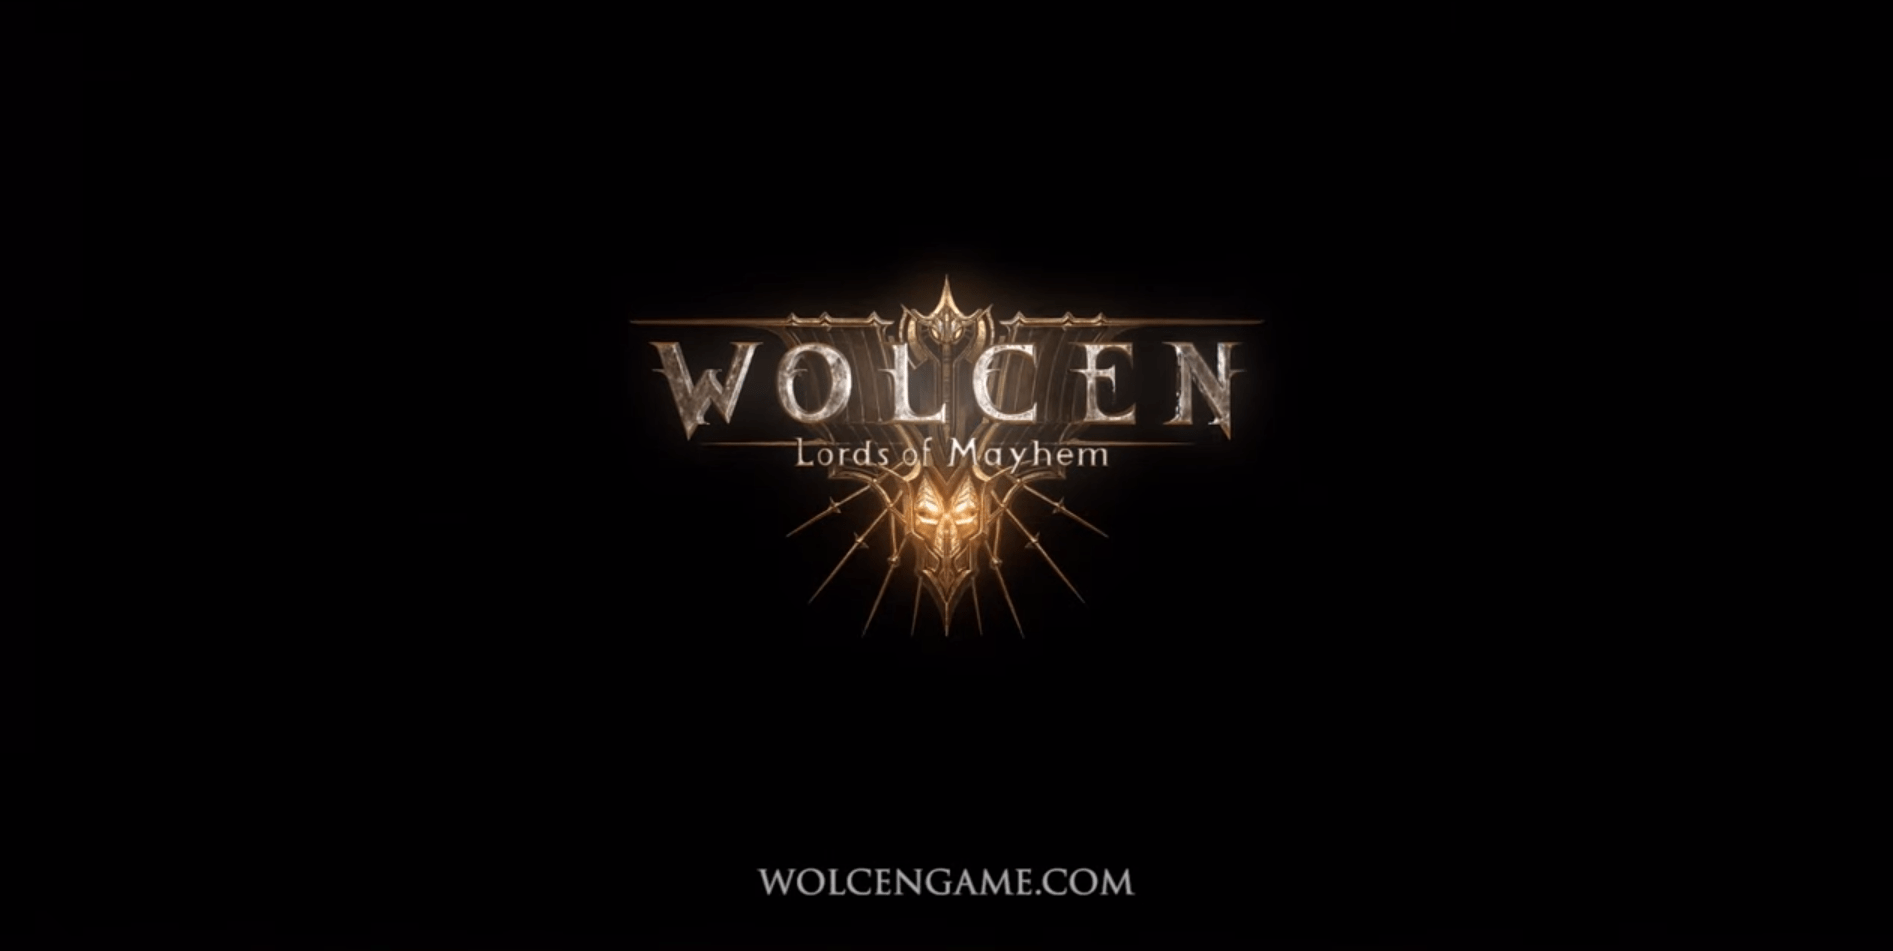 Wolcen Studio Discusses Plans For The Future Of Wolcen After Flubbing Game’s Launch